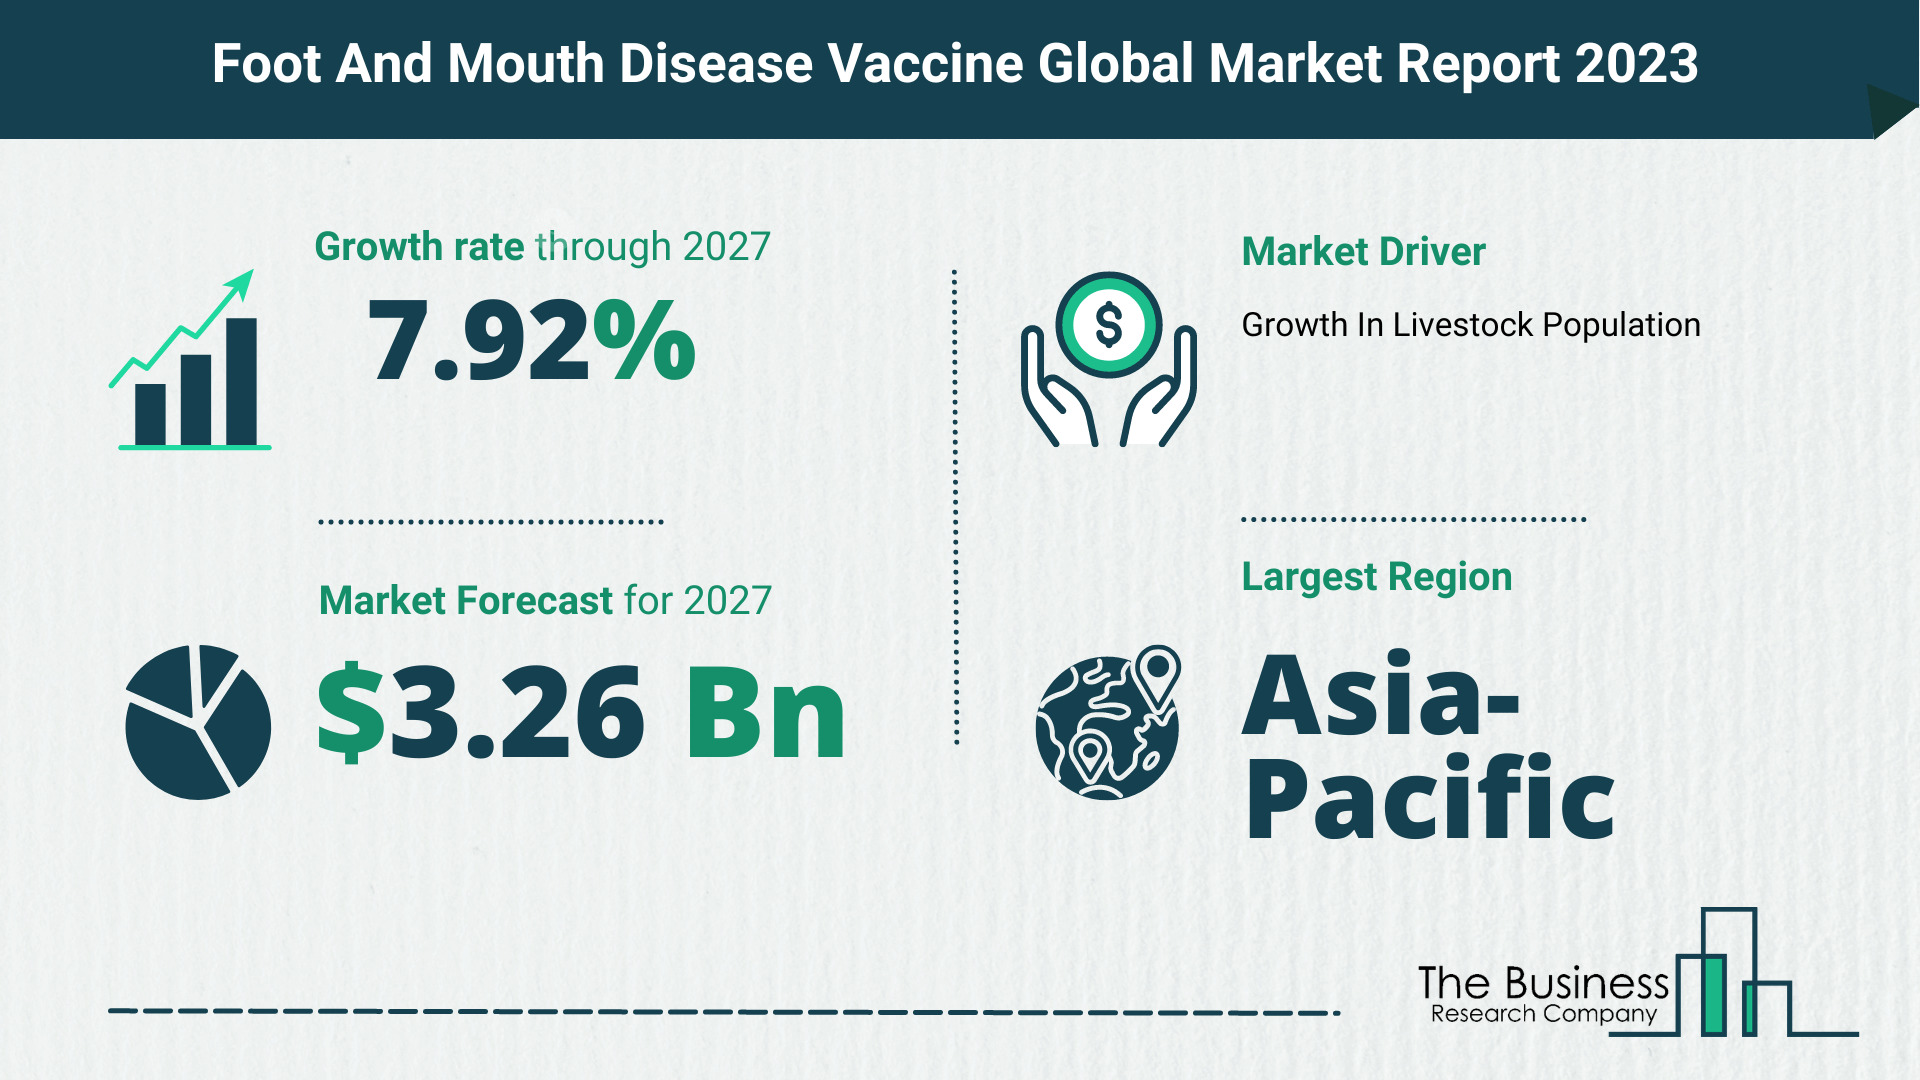 What Will The Foot And Mouth Disease Vaccine Market Look Like In 2023?